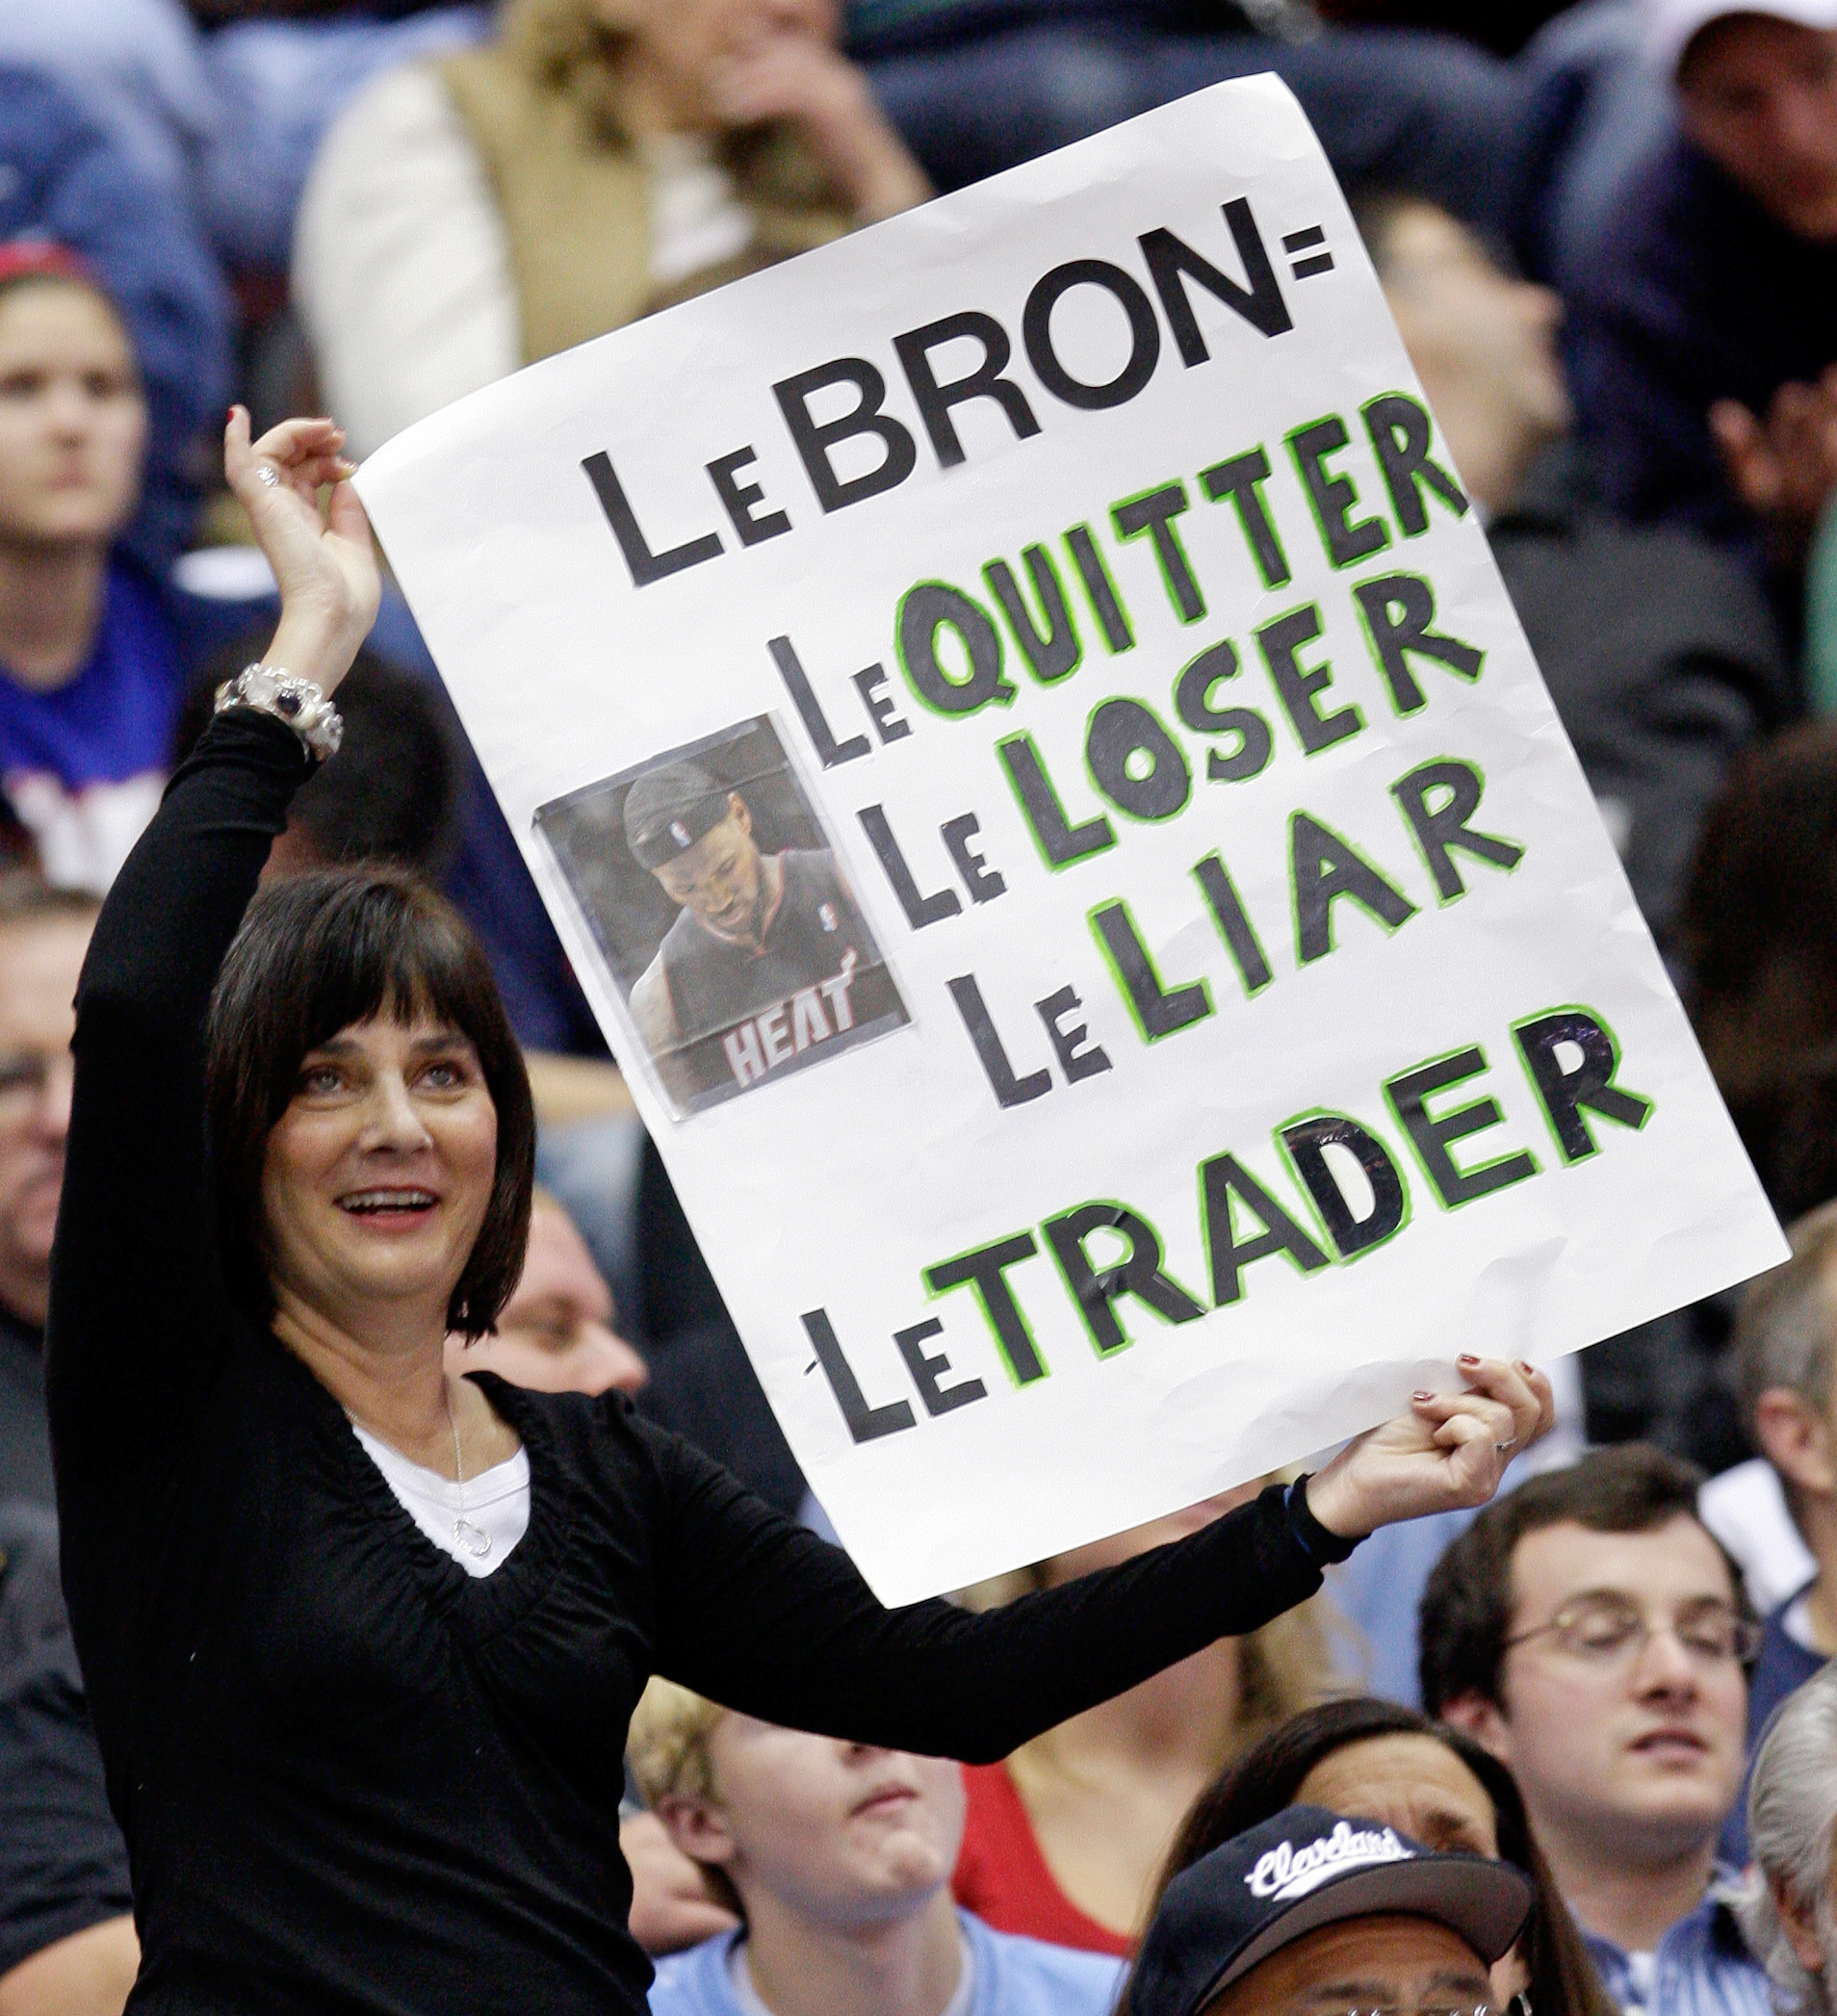 PHOTO: A fan displays her opinion of Miami Heat forward LeBron James during the third quarter of an NBA basketball game against the Cleveland Cavaliers, Dec. 2, 2010, in Cleveland.